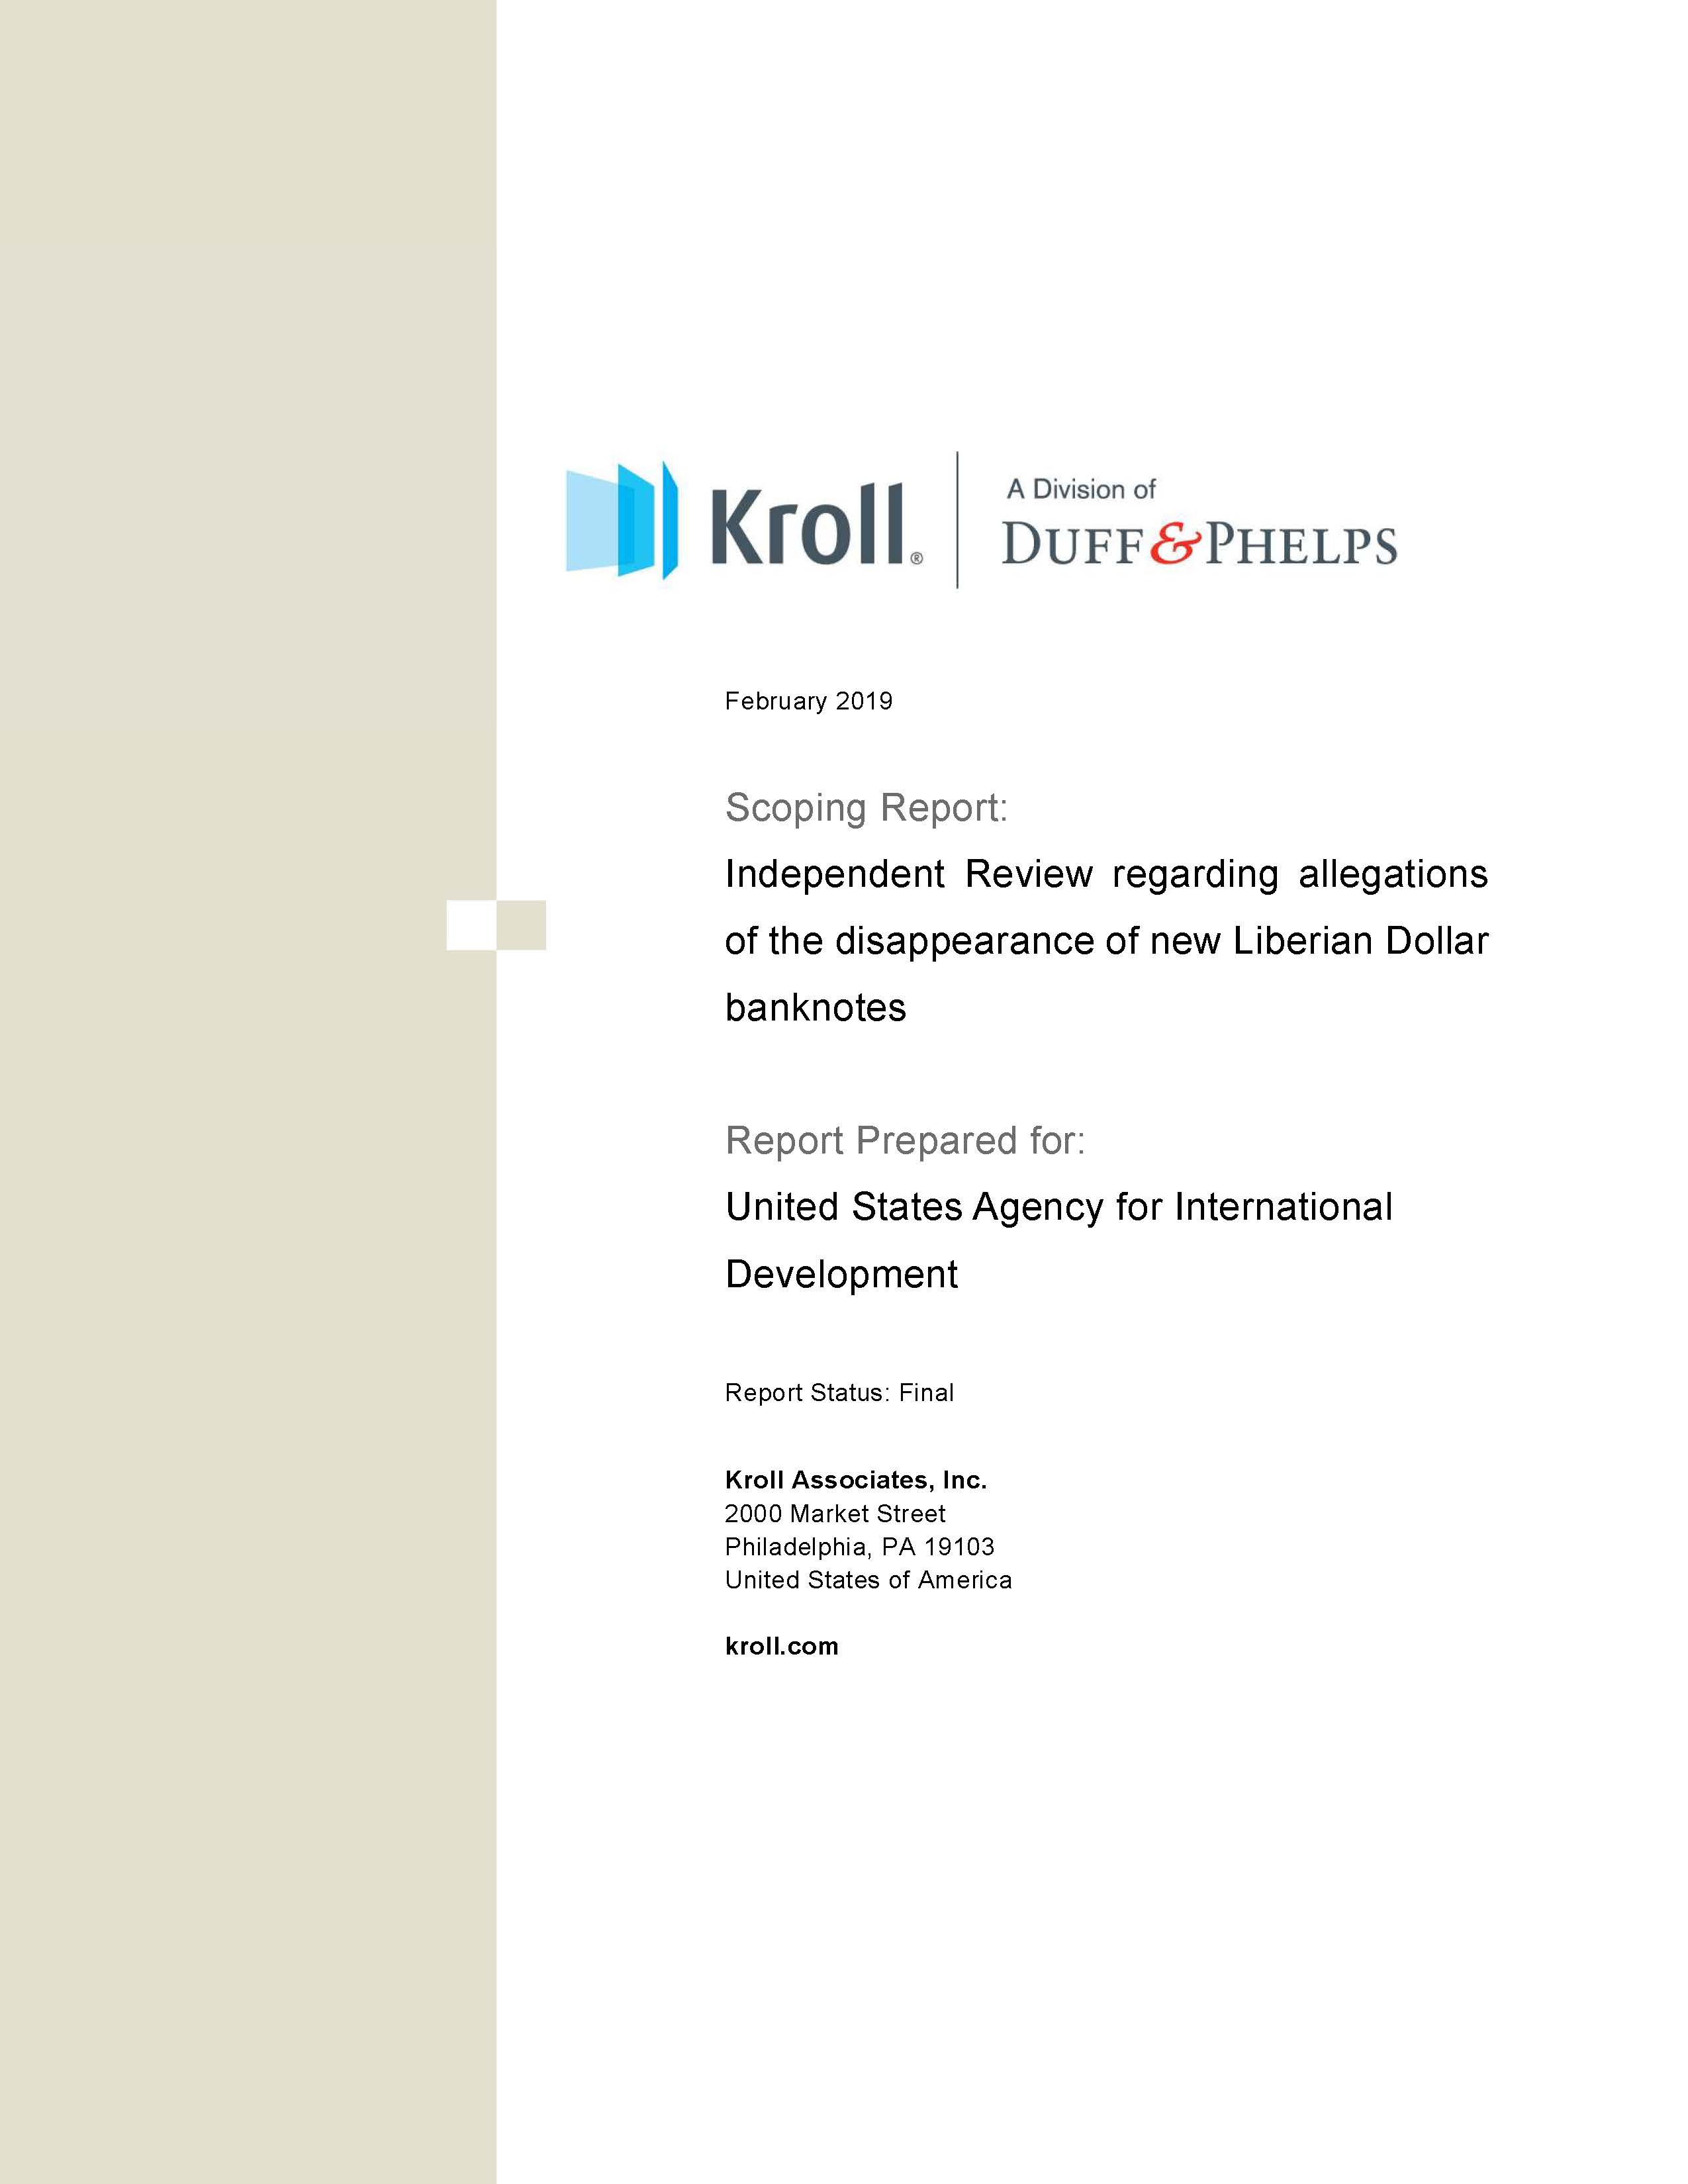 Independent Review Report prepared by Kroll Associates Inc.